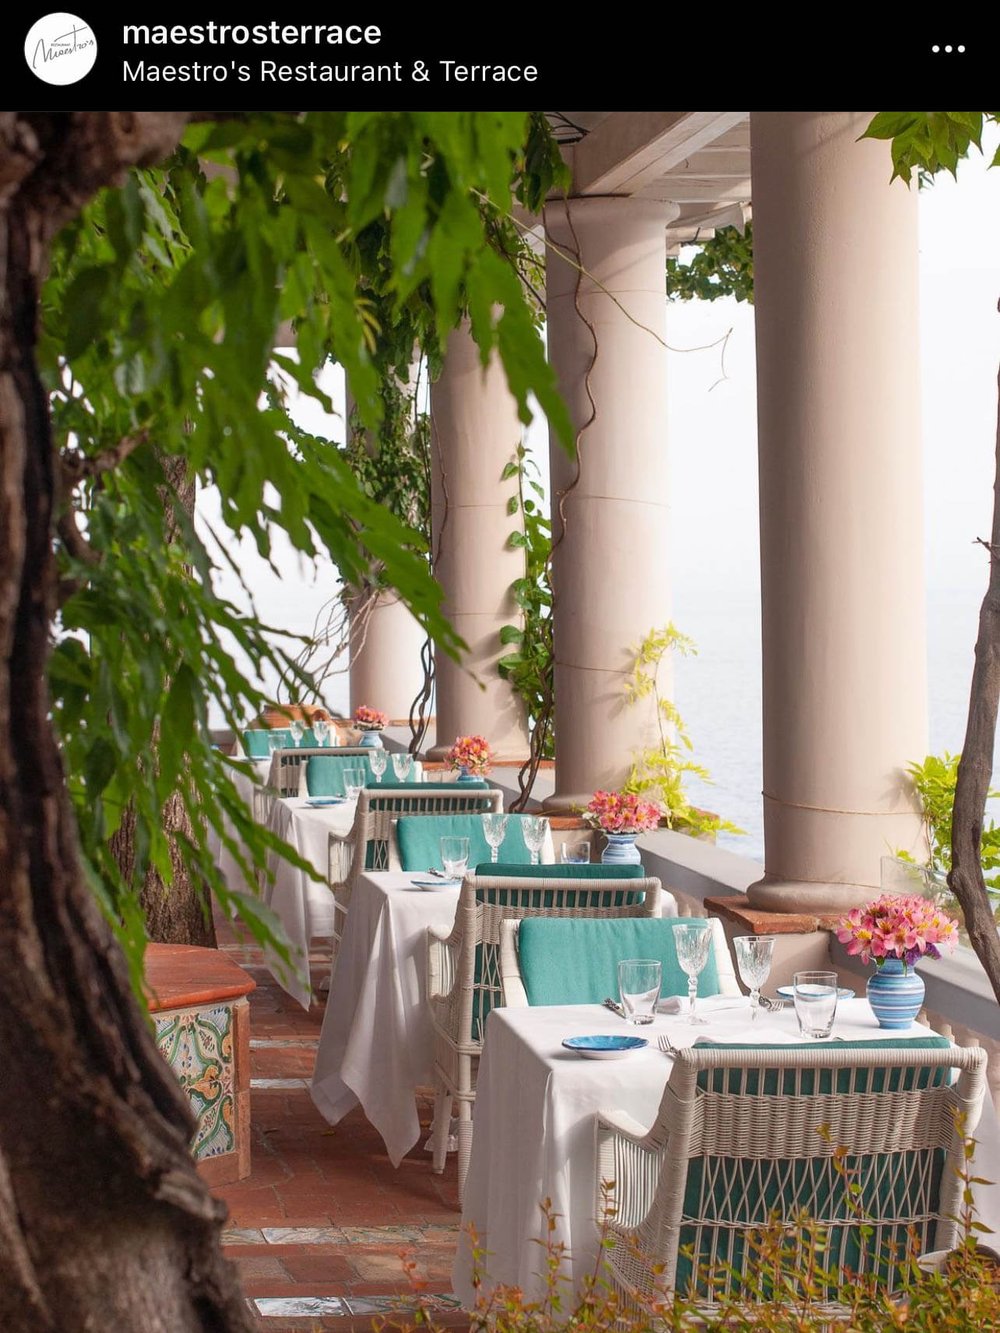 Maestro's is situated on a vine-covered open terrace with unreal panoramic views of the sea and of Positano